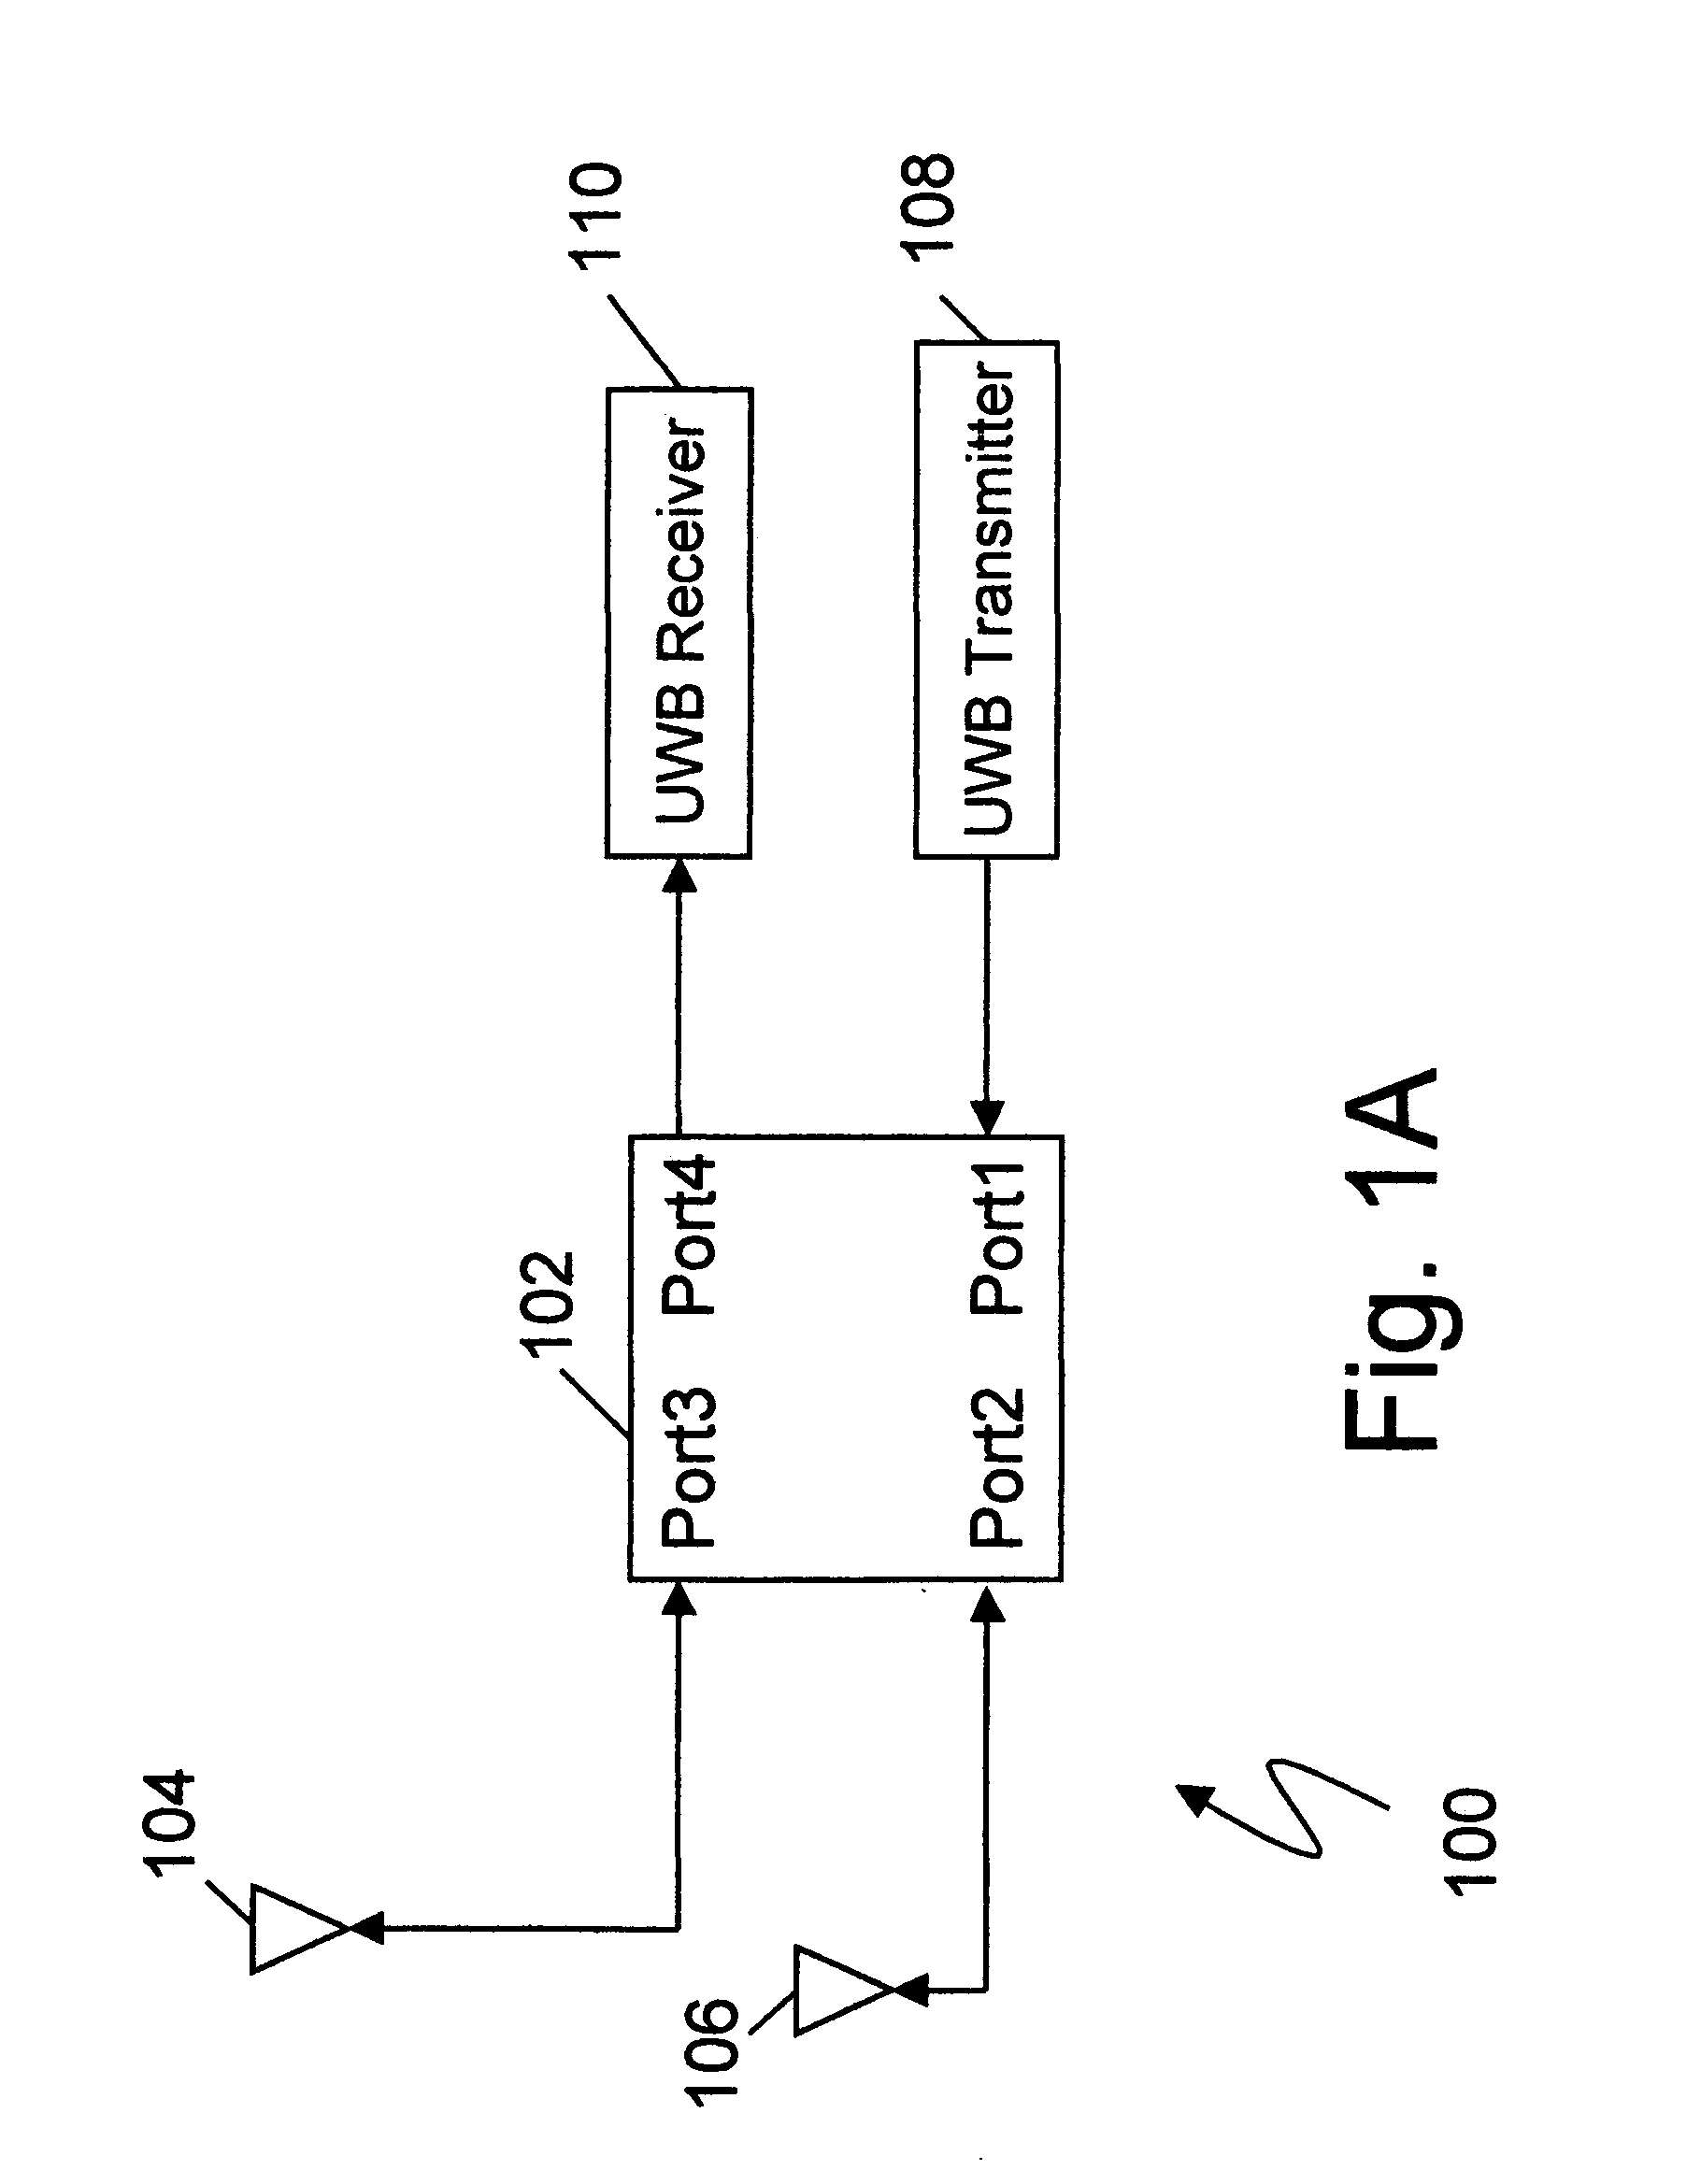 System and method for duplex operation using a hybrid element